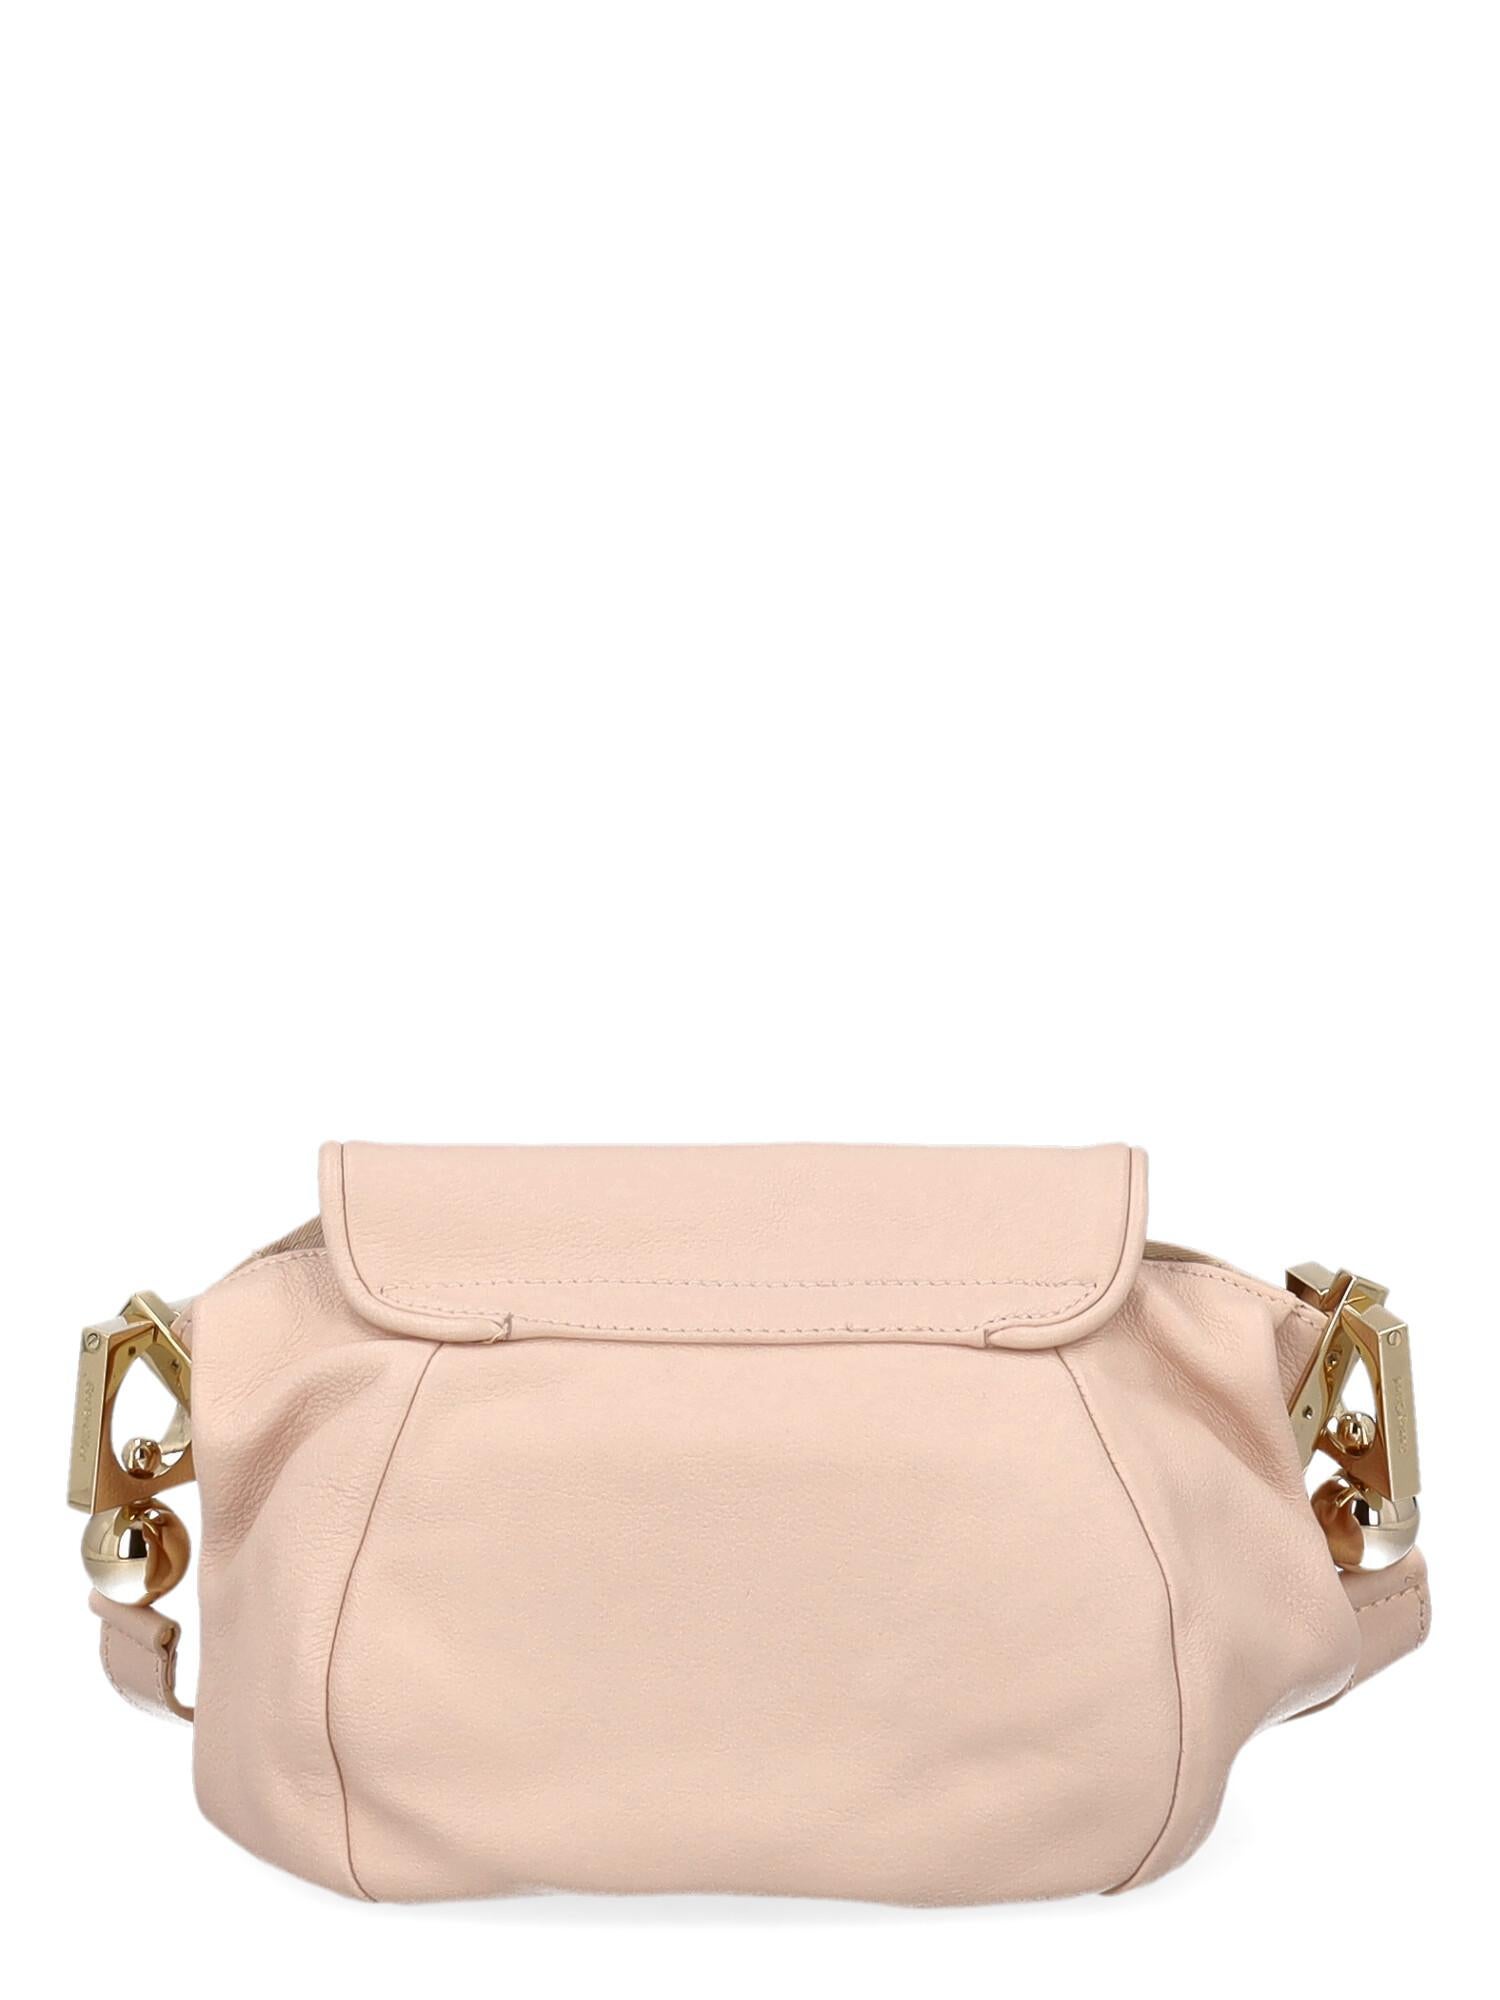 See By Chloé Women Shoulder bags Pink Leather  In Good Condition For Sale In Milan, IT